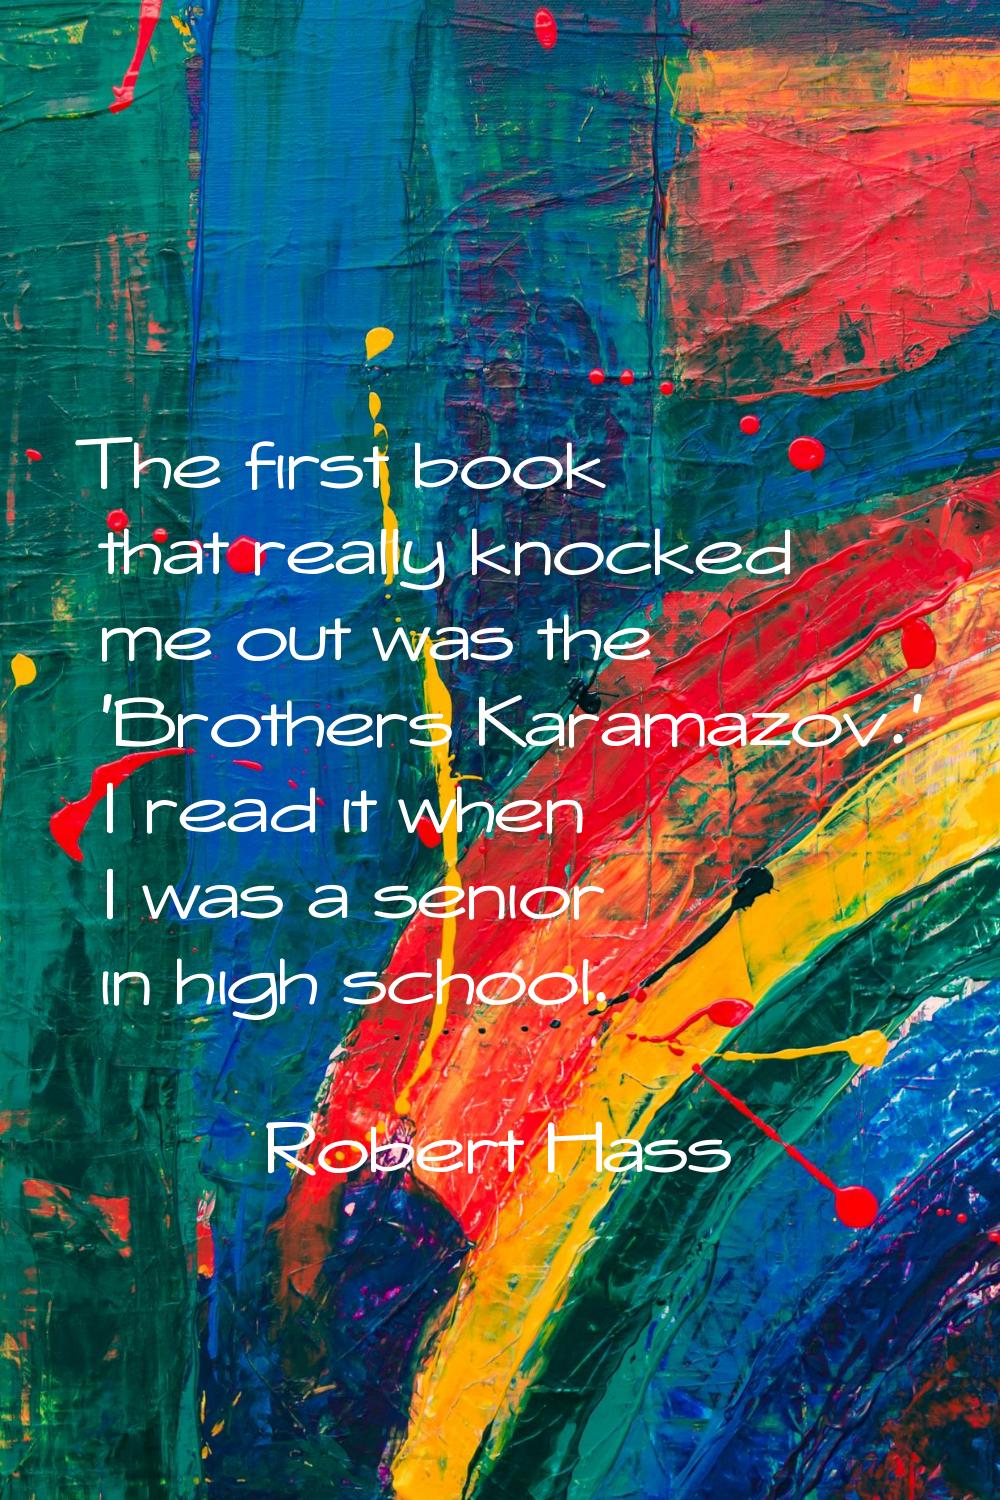 The first book that really knocked me out was the 'Brothers Karamazov.' I read it when I was a seni